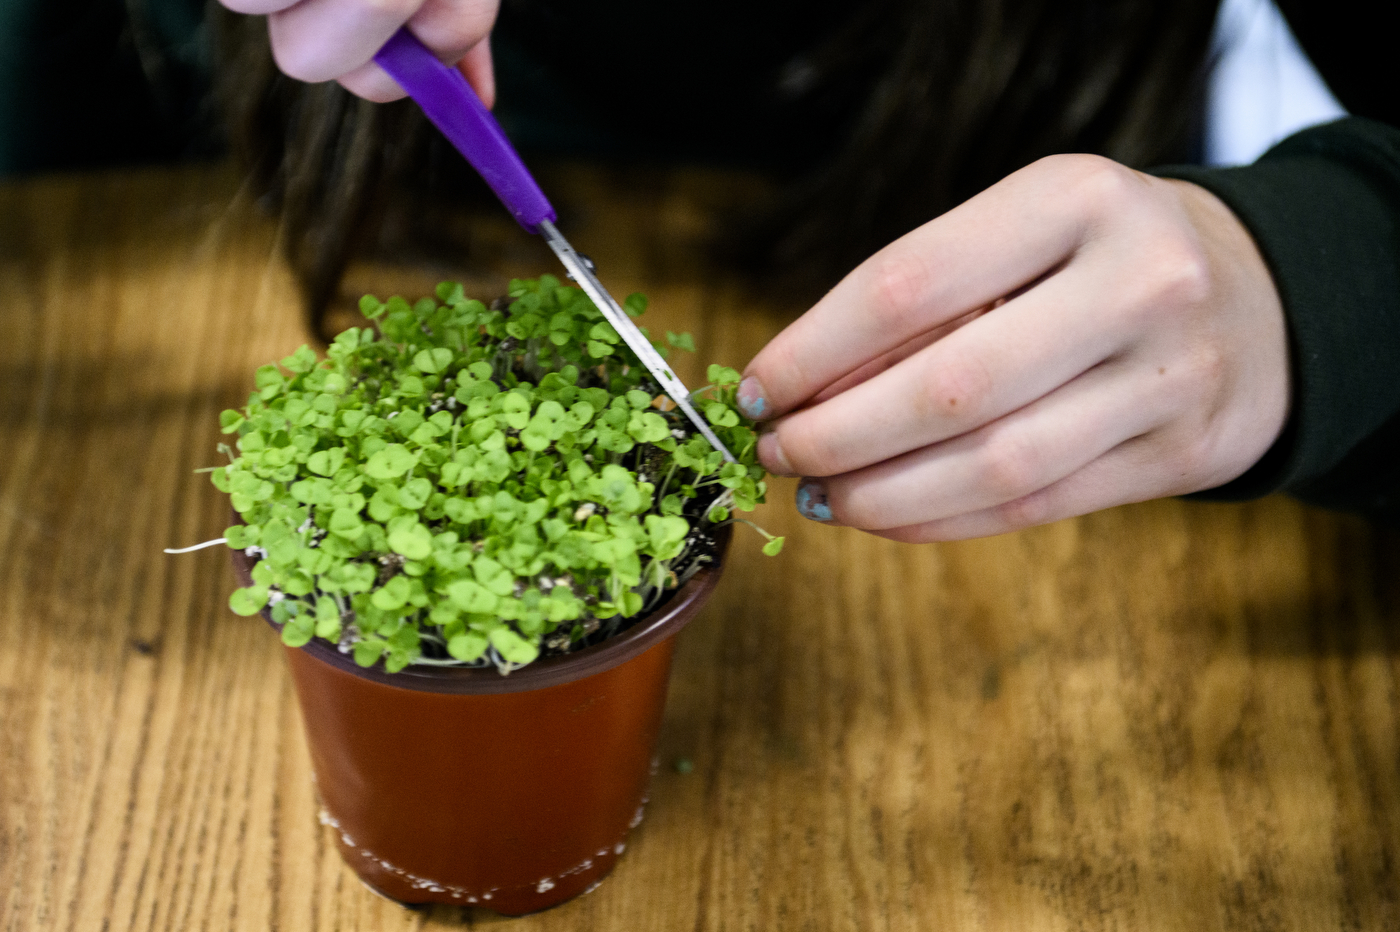 student cutting microgreen with scissors